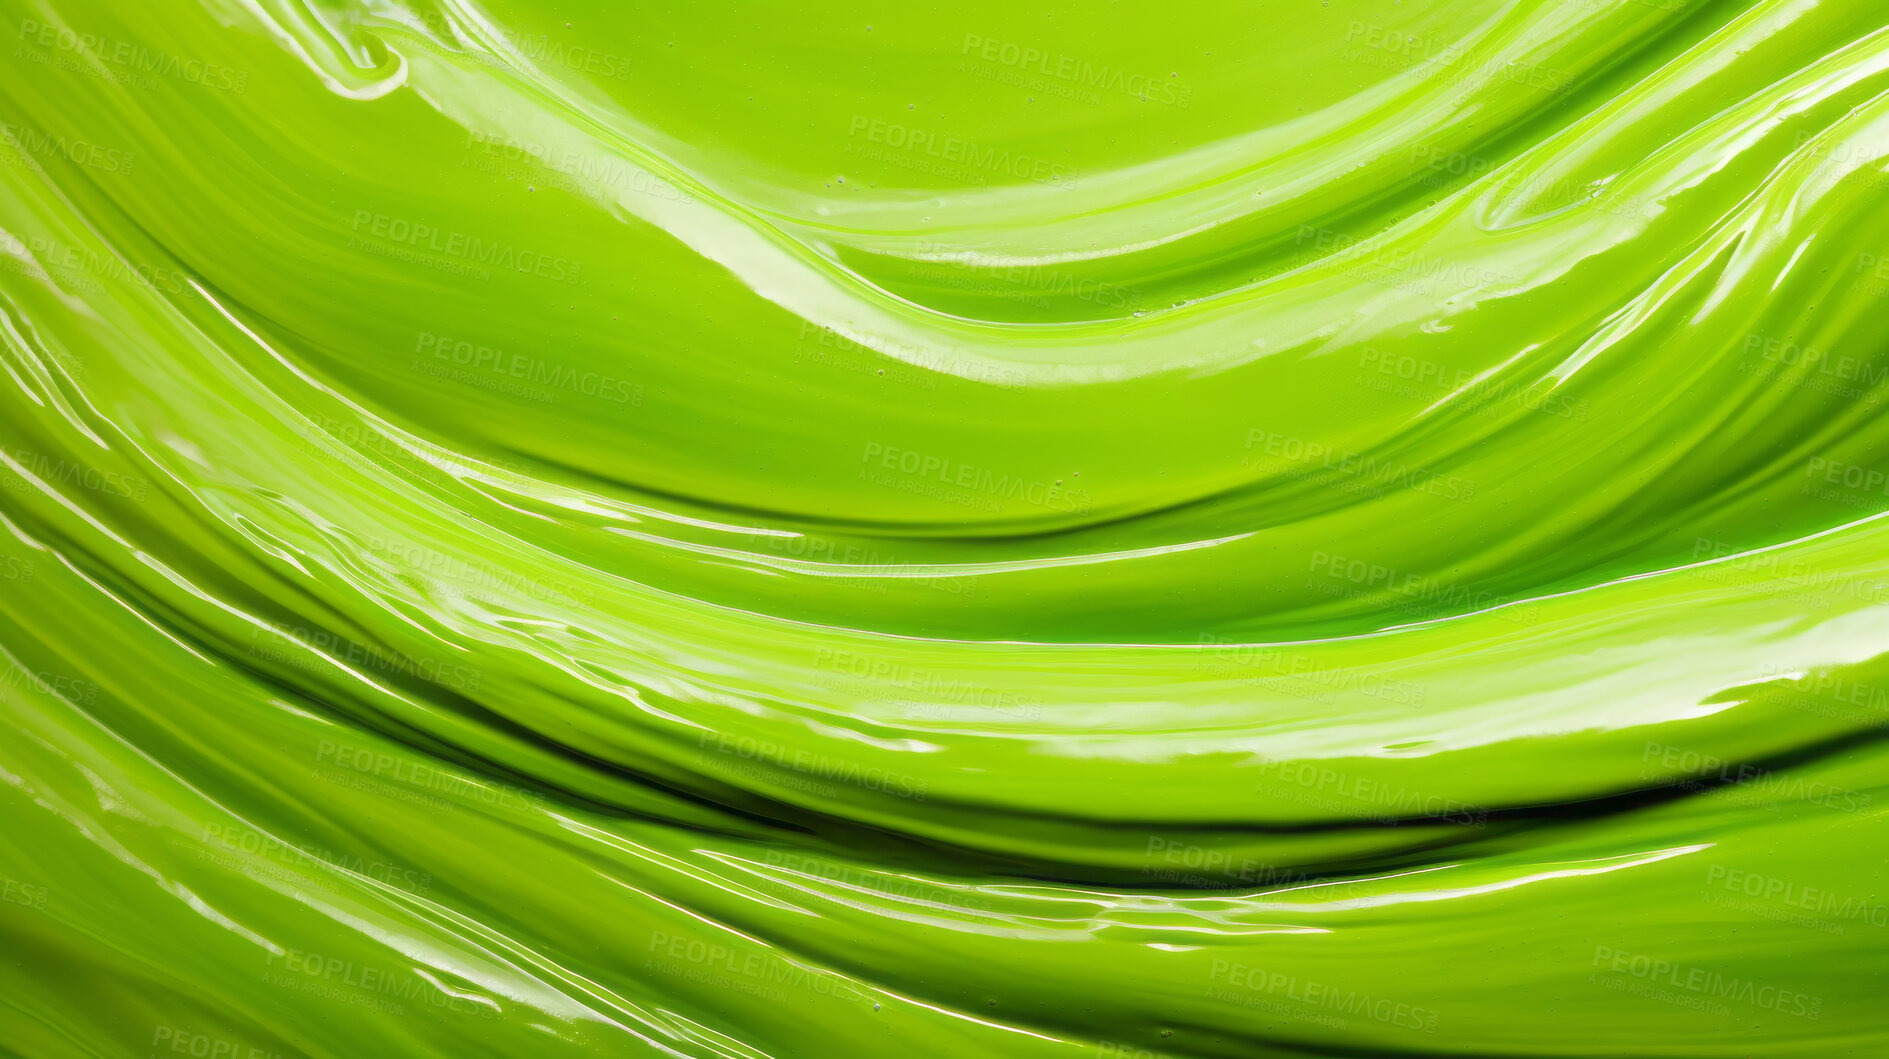 Buy stock photo Green smooth paint texture close-up. Swirl abstract background.